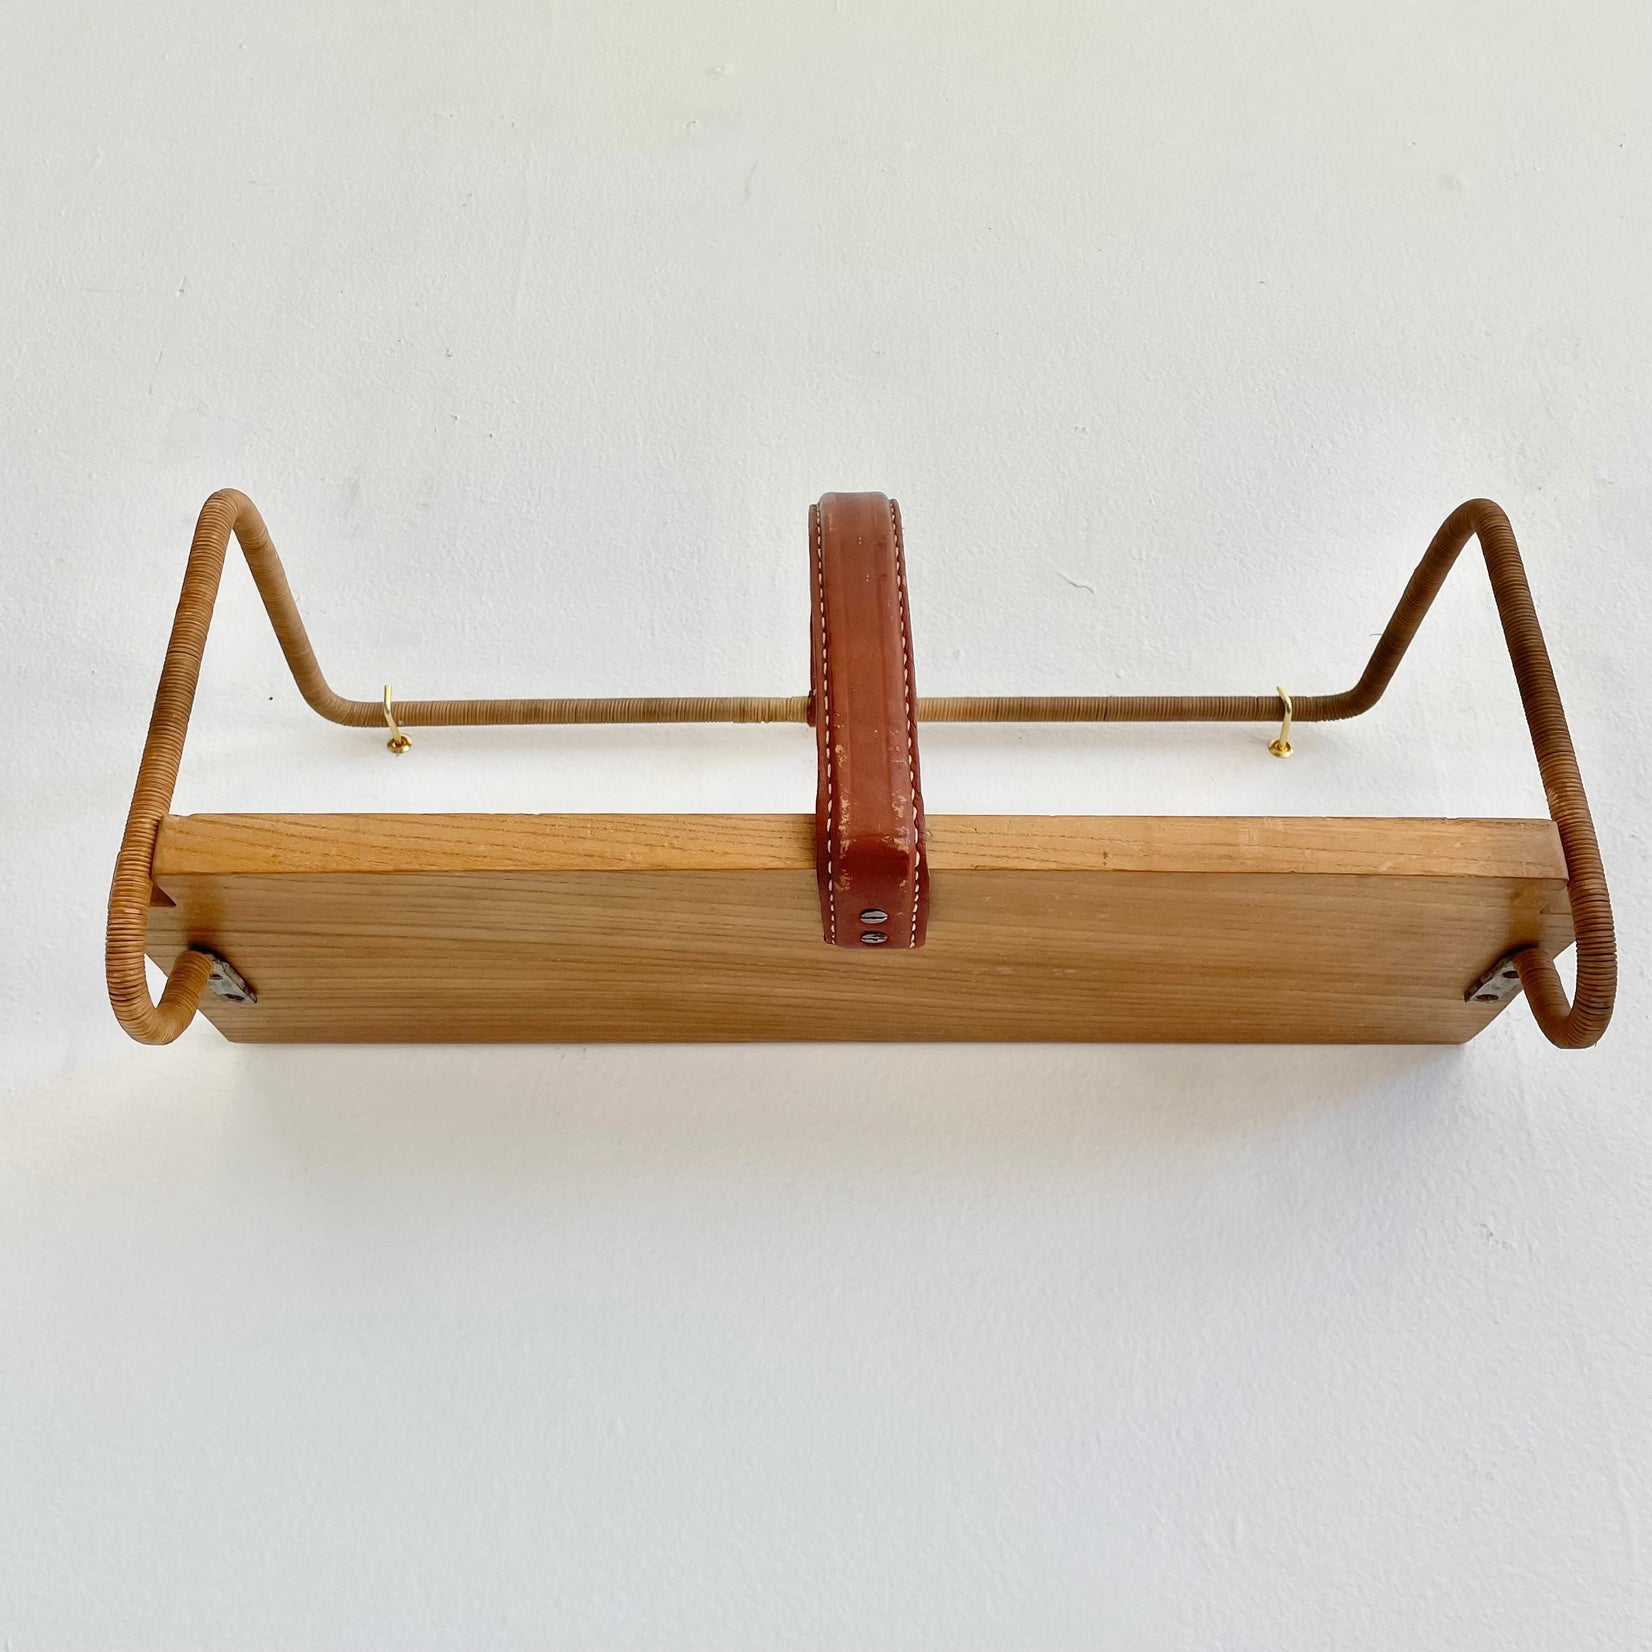 Jacques Adnet Leather, Wood and Twine Shelf, 1950s France